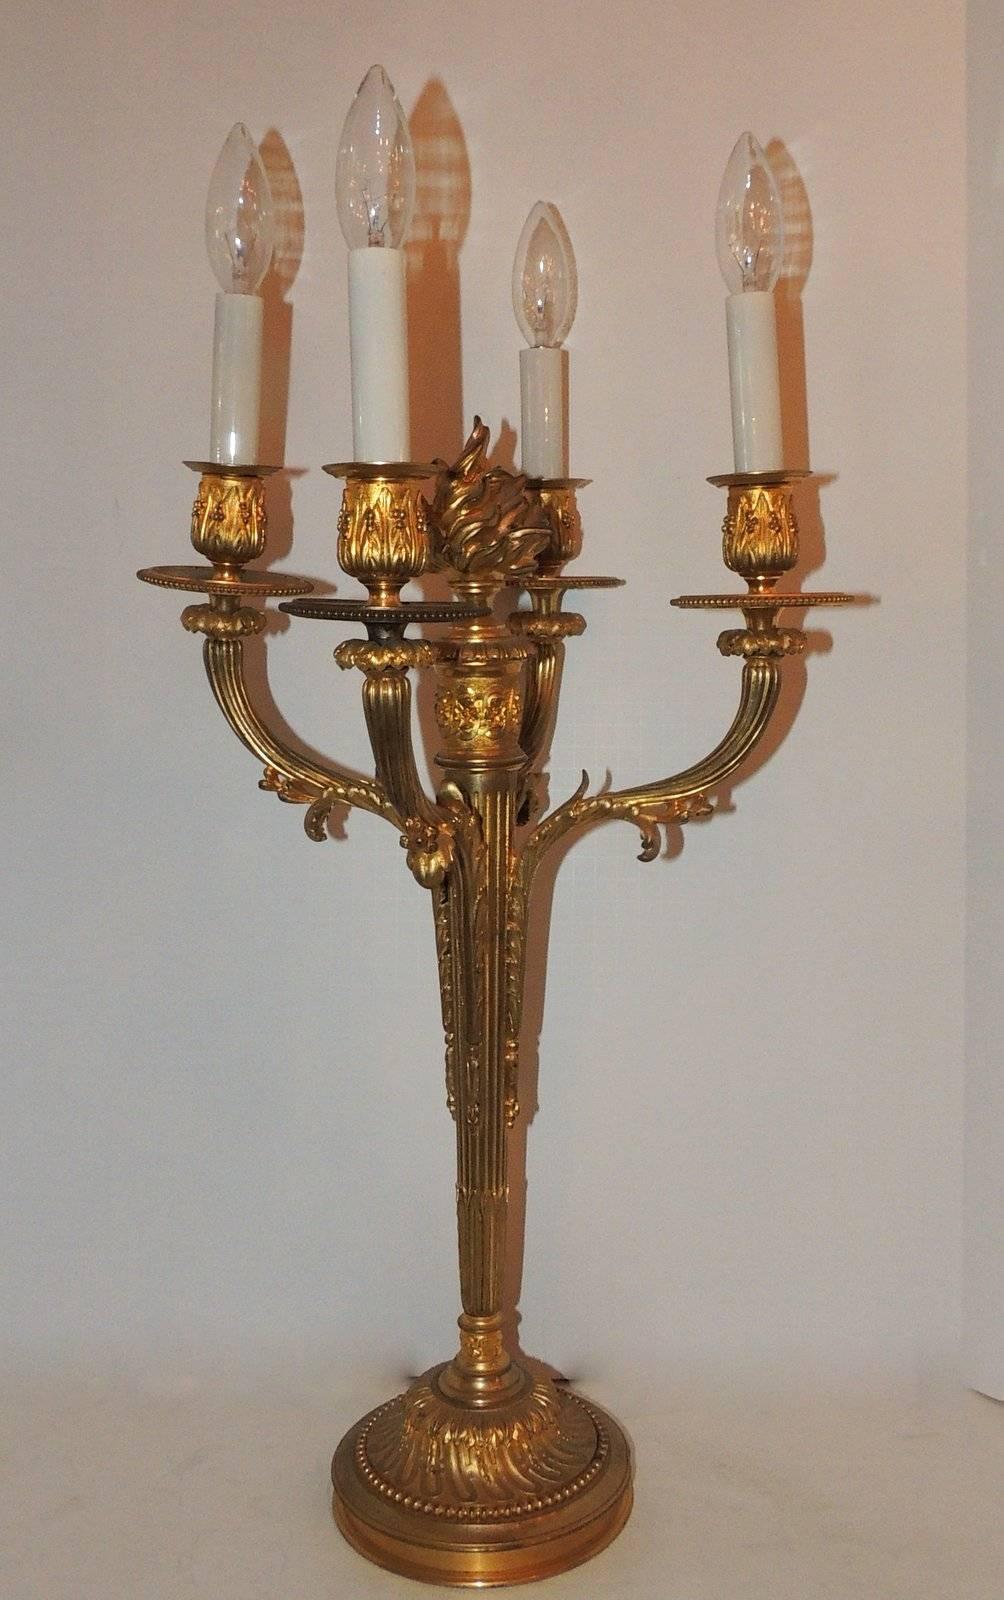 A wonderful pair of doré bronze large candelabras with centre flame, detailed surrounded by four arms with filigree, fluted center shaft and finely etched filigree pedestal base.


Measures: 24" H x 9" D x 10" W.